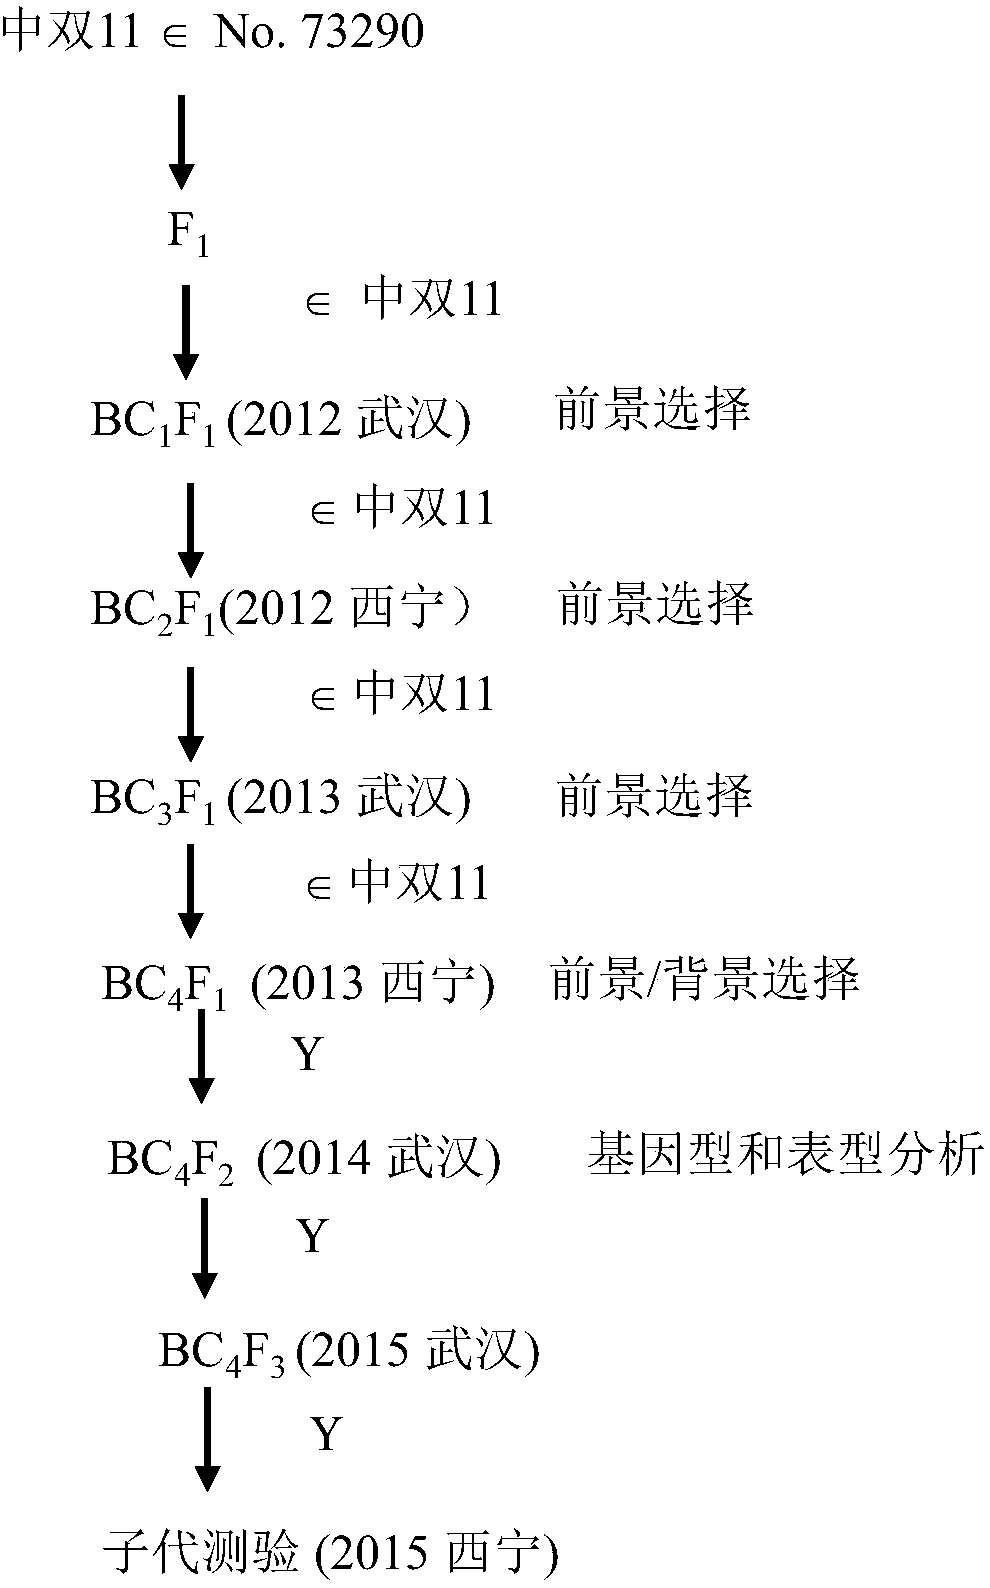 Brassica napus seed number per silique major gene locus close linkage molecular markers and applications thereof